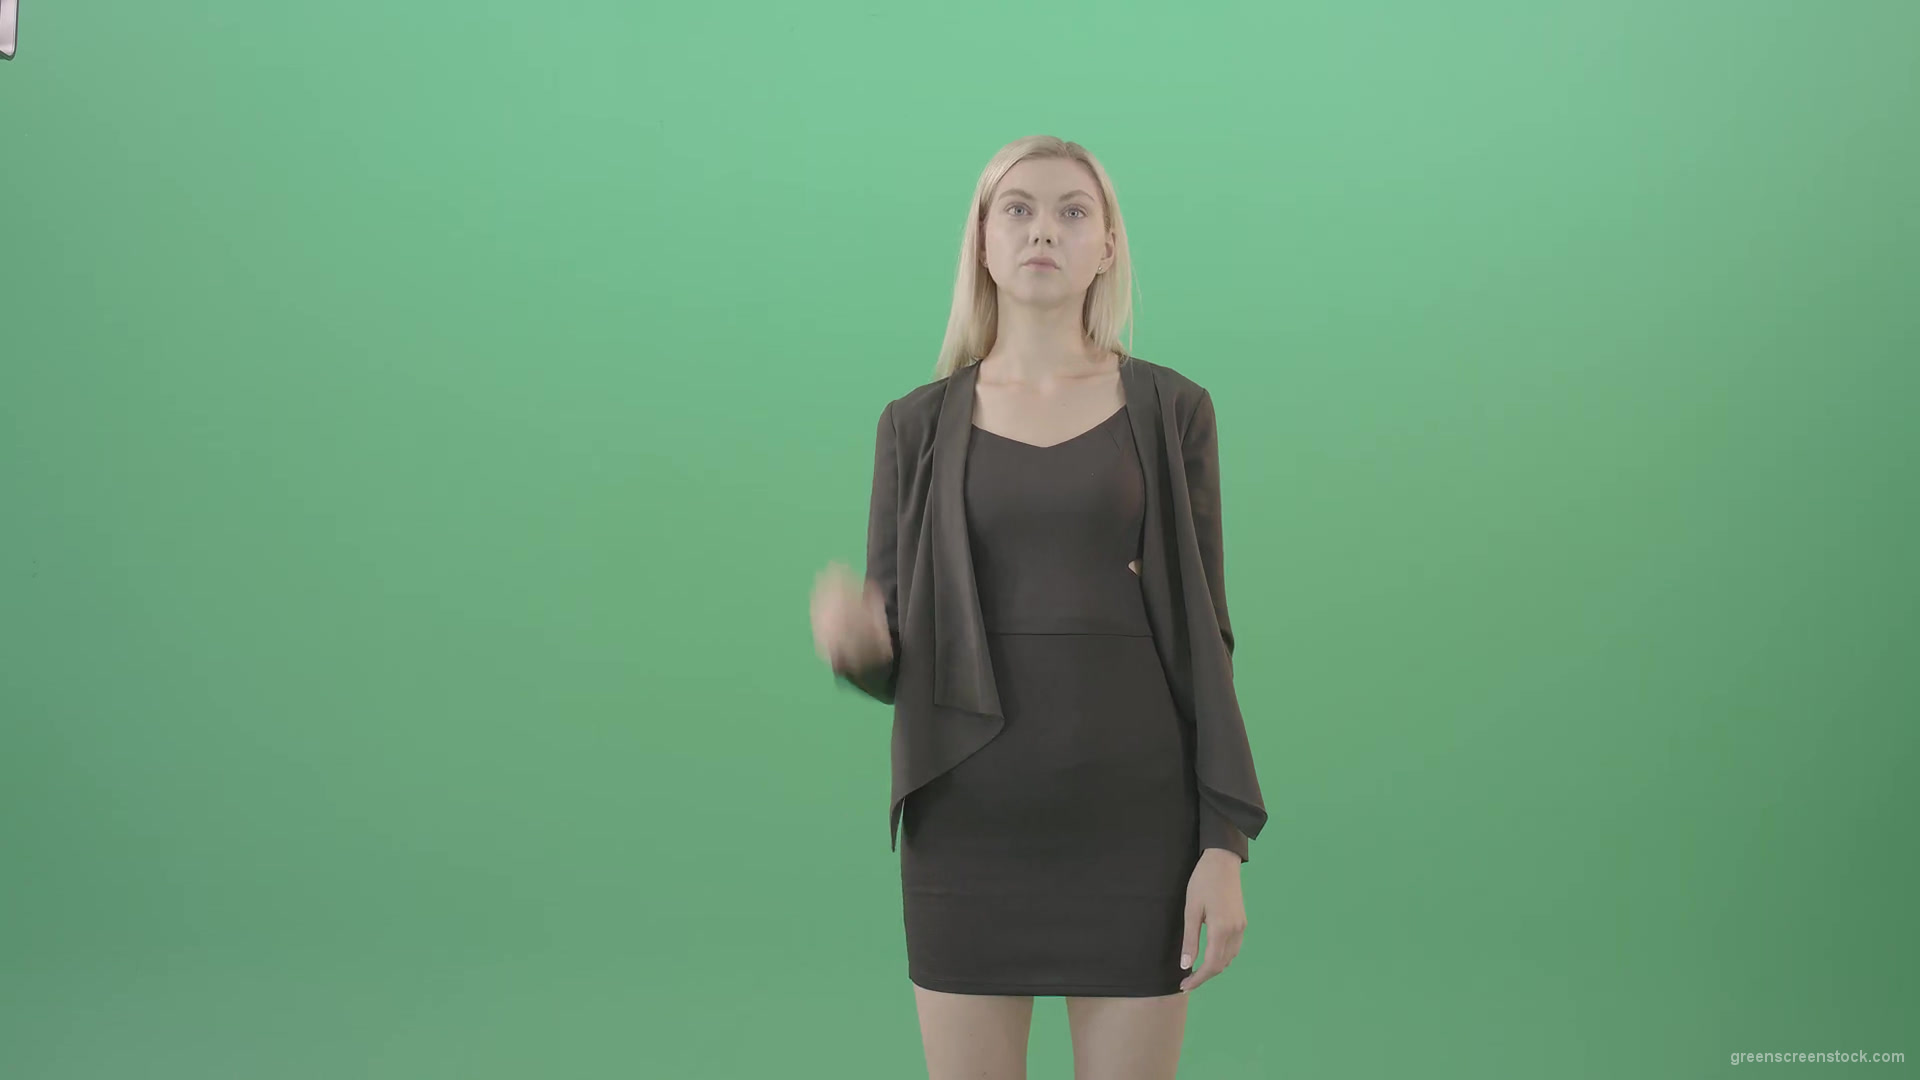 Girl-searching-in-internet-virtual-shopping-on-touch-screen-on-green-background-4K-Video-Footage-1920_002 Green Screen Stock